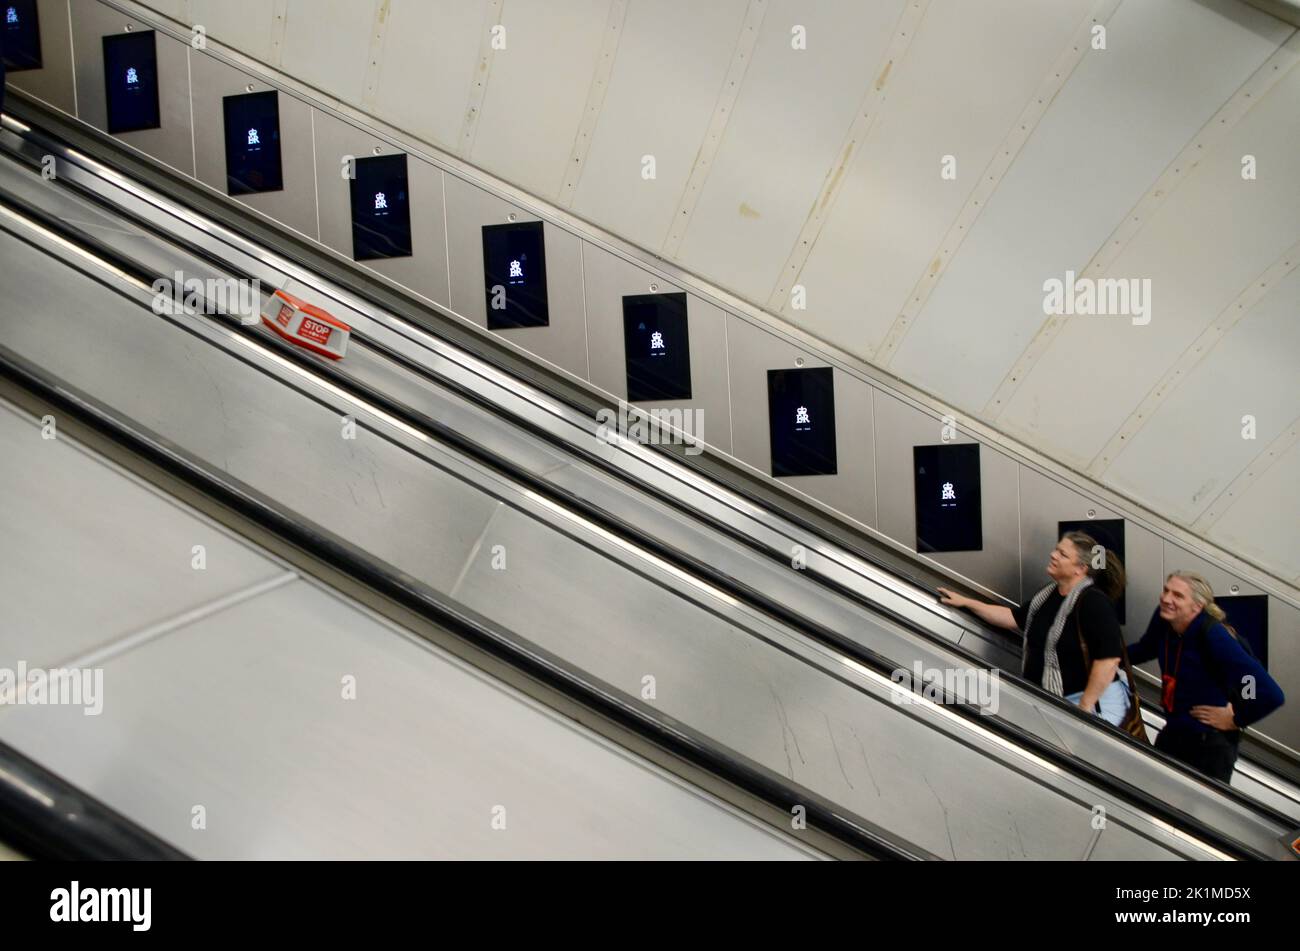 escalator at charing cross tube; scenes from central london on the occasion of the funeral of Queen Elizabeth 2 19th september 2022 Stock Photo